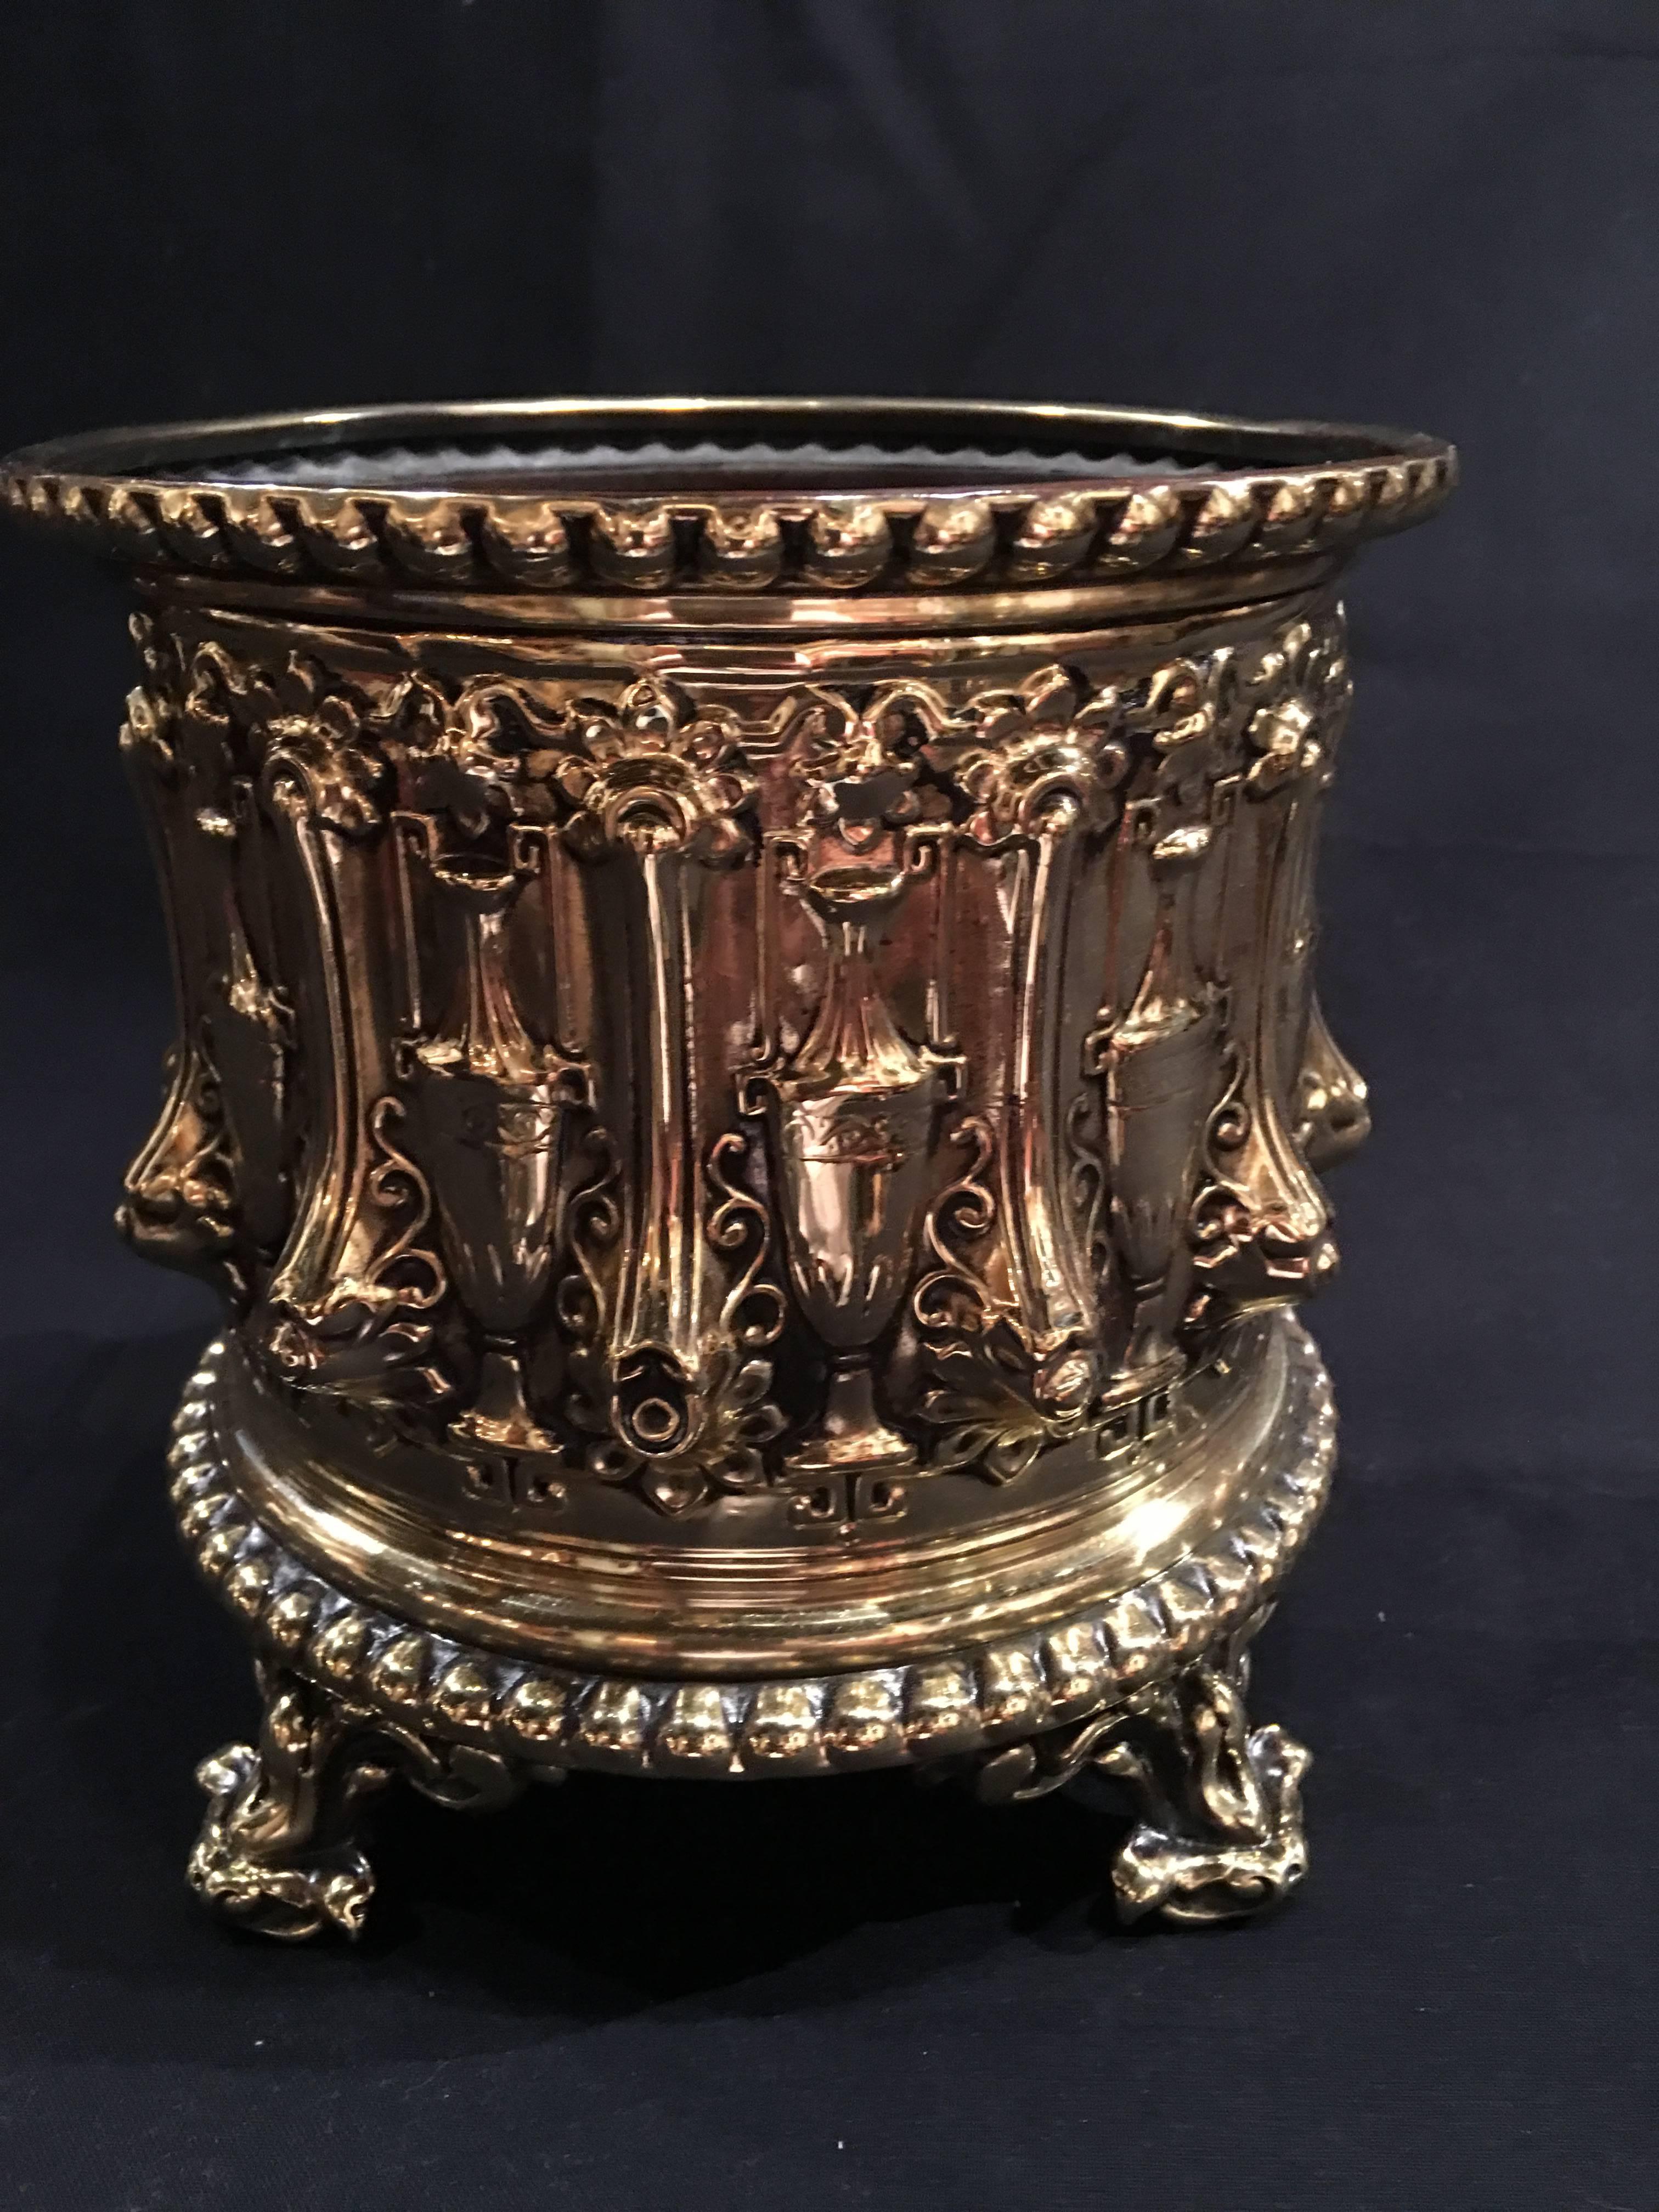 French polished round jardinière or planter, 19th century.